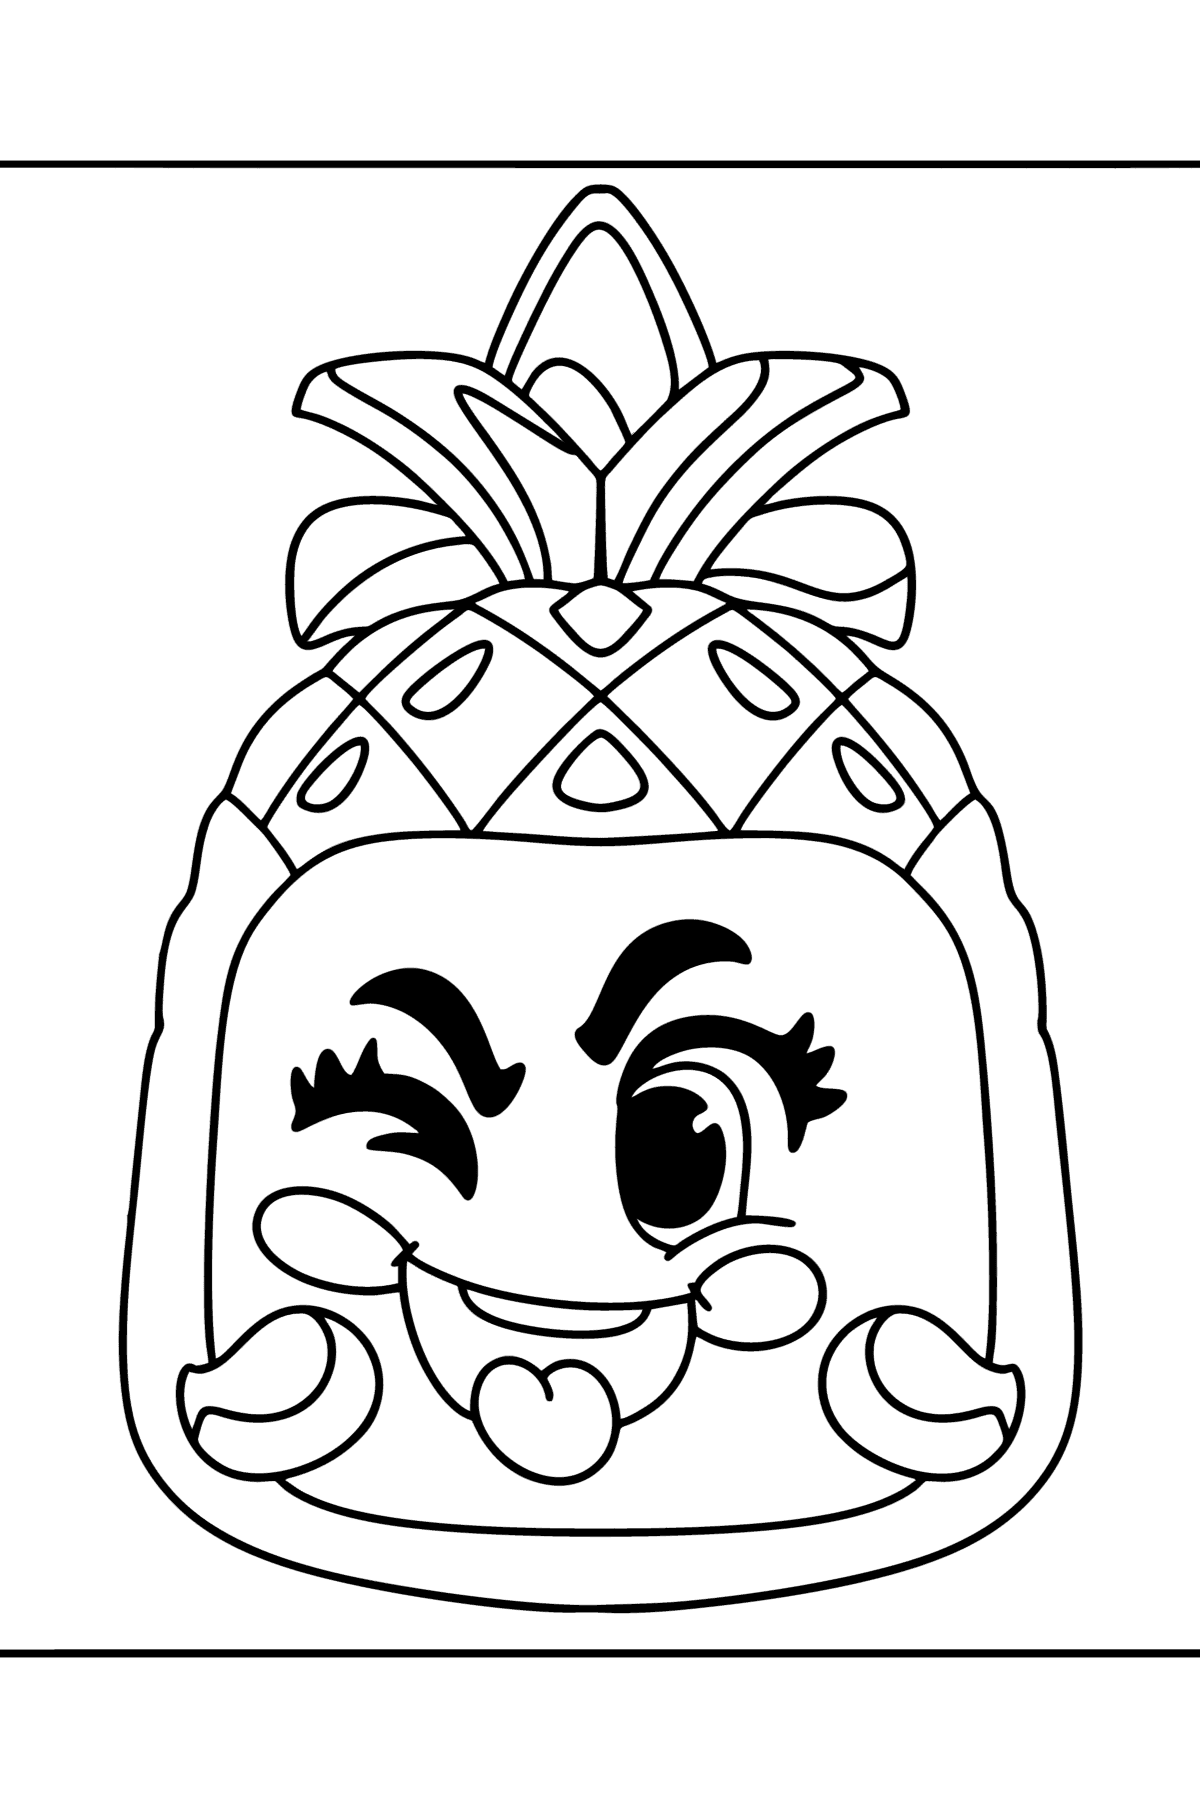 Coloring page MojiPops Pipples - Coloring Pages for Kids